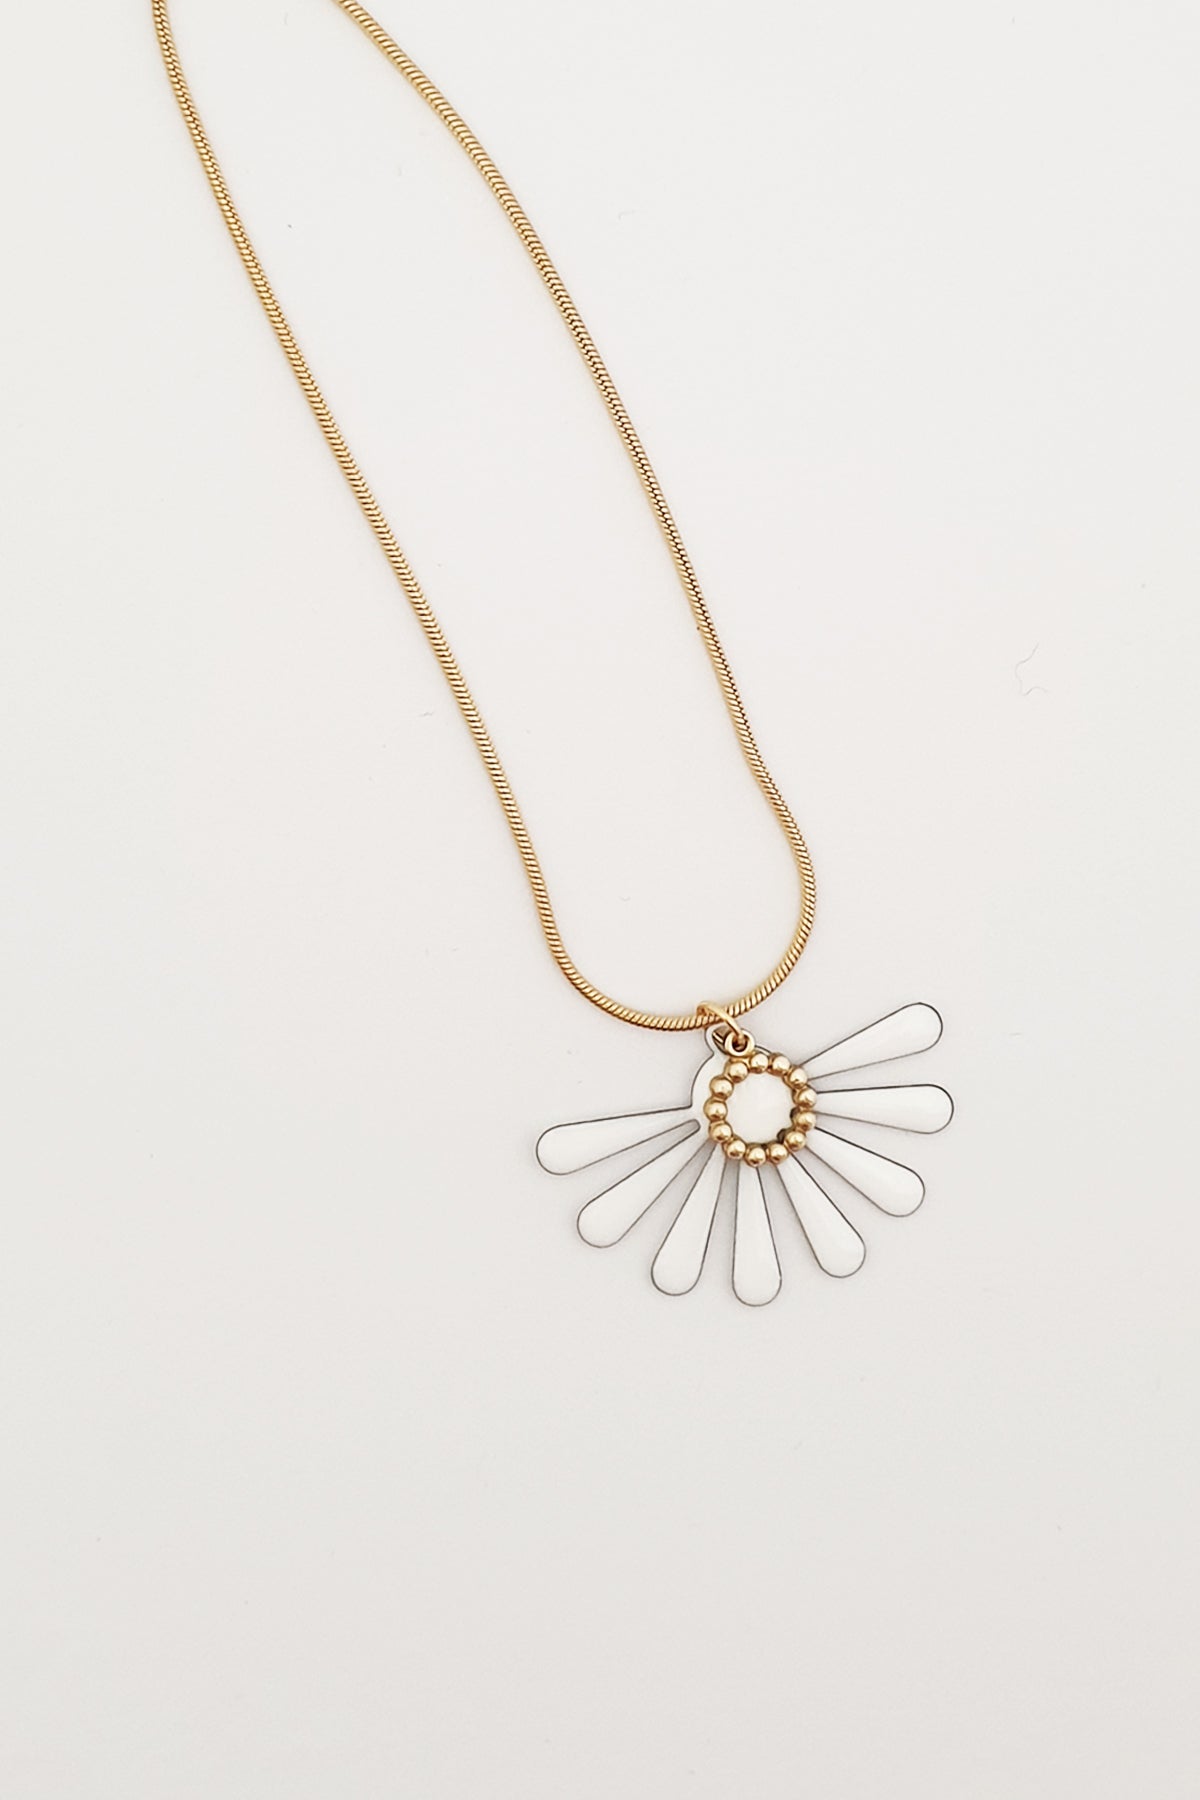 A necklace sits against a white background. It features a gold chain and a white coloured floral enamel shape. A tiny brass ring encircles the disk of the floral enamel piece.